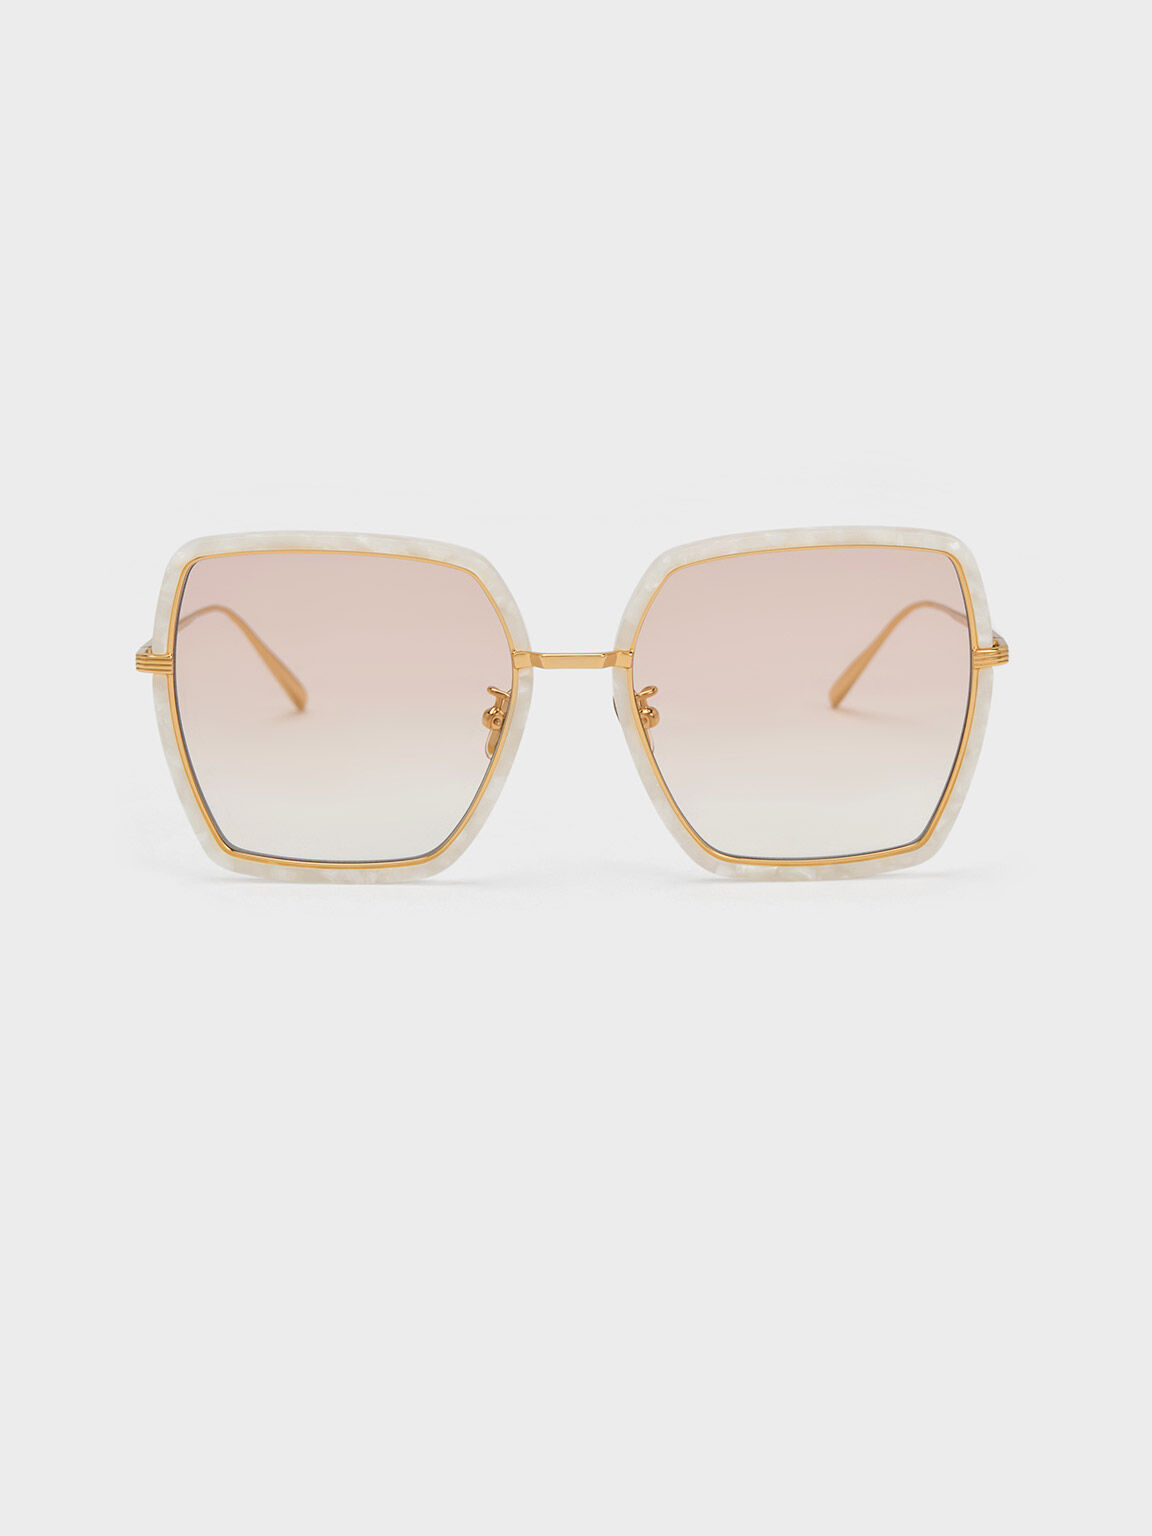 Oversized Square Butterfly Sunglasses, Cream, hi-res